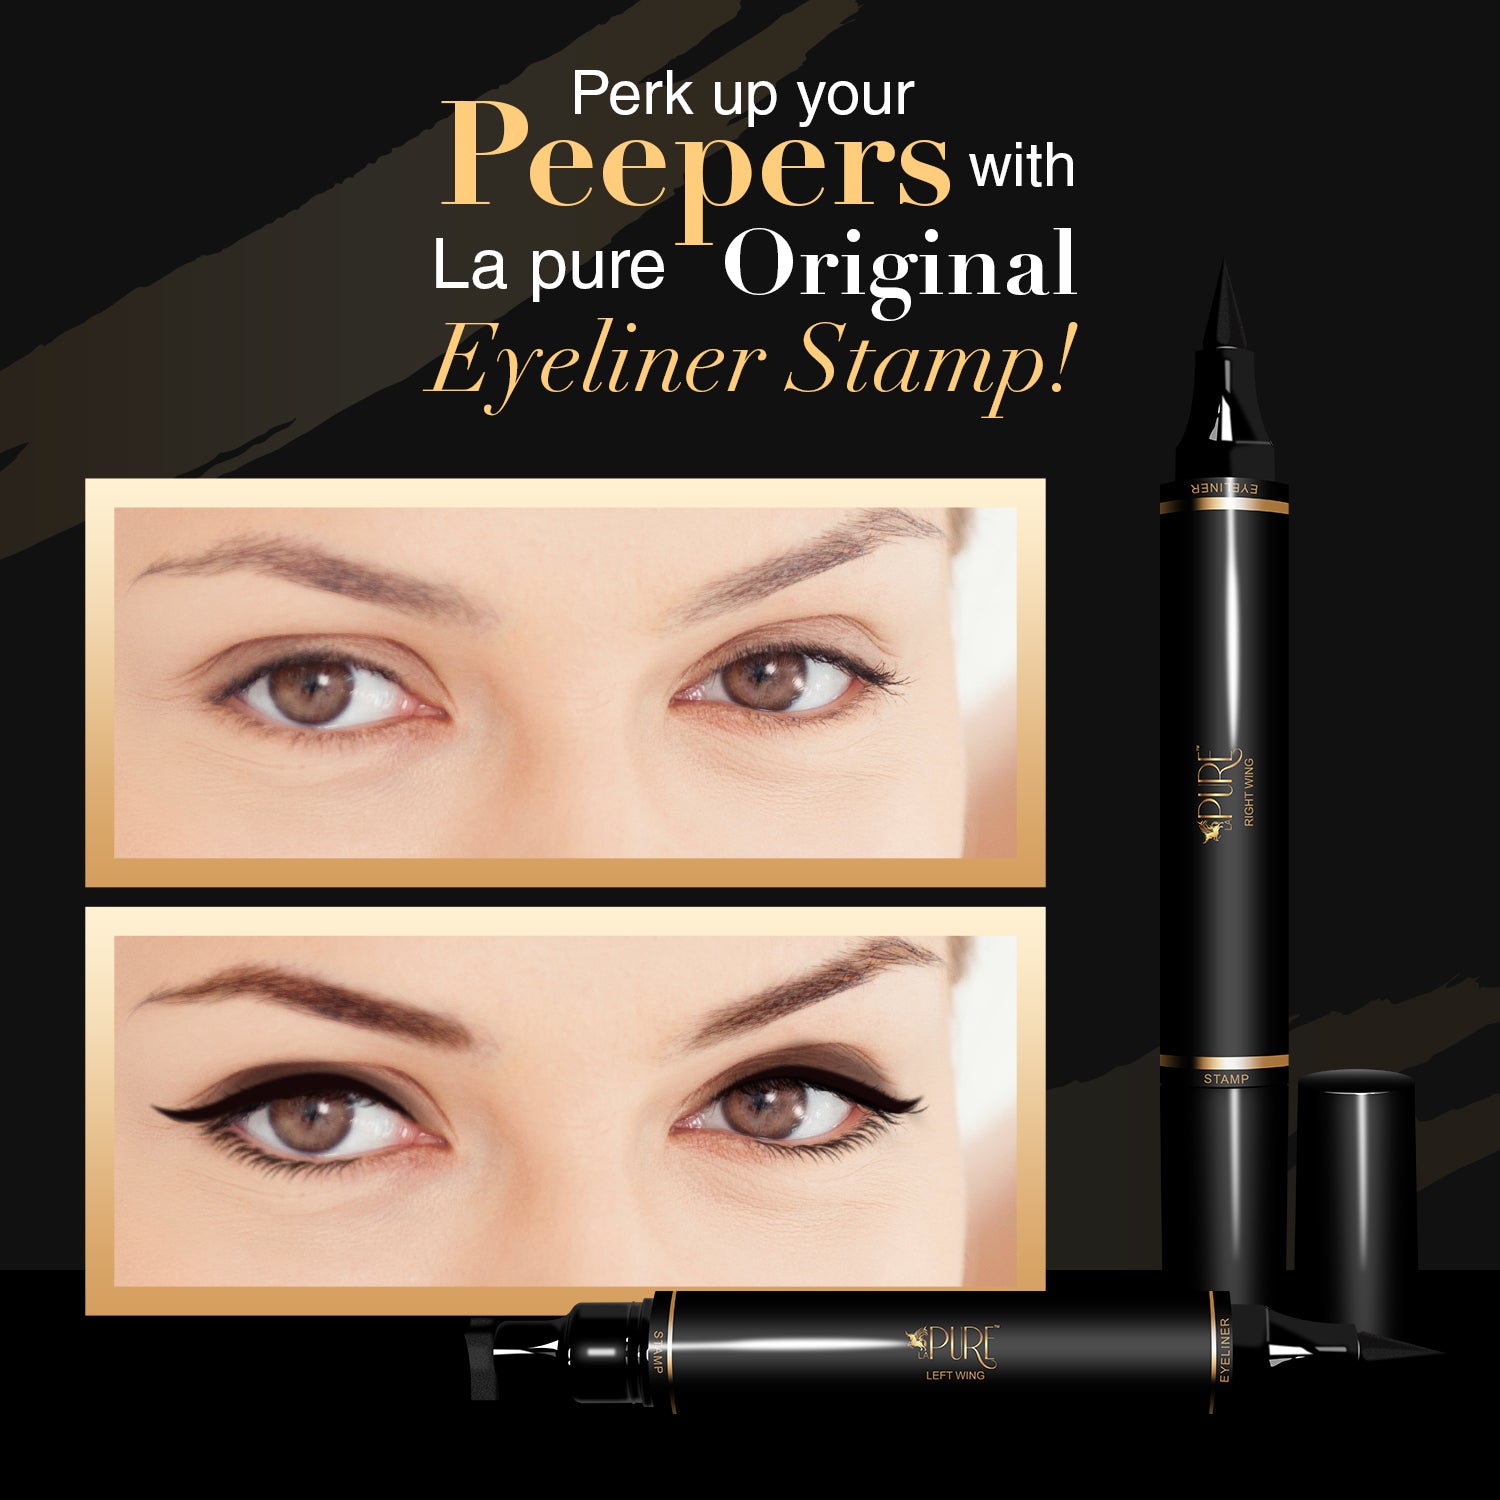 Perk up your peepers